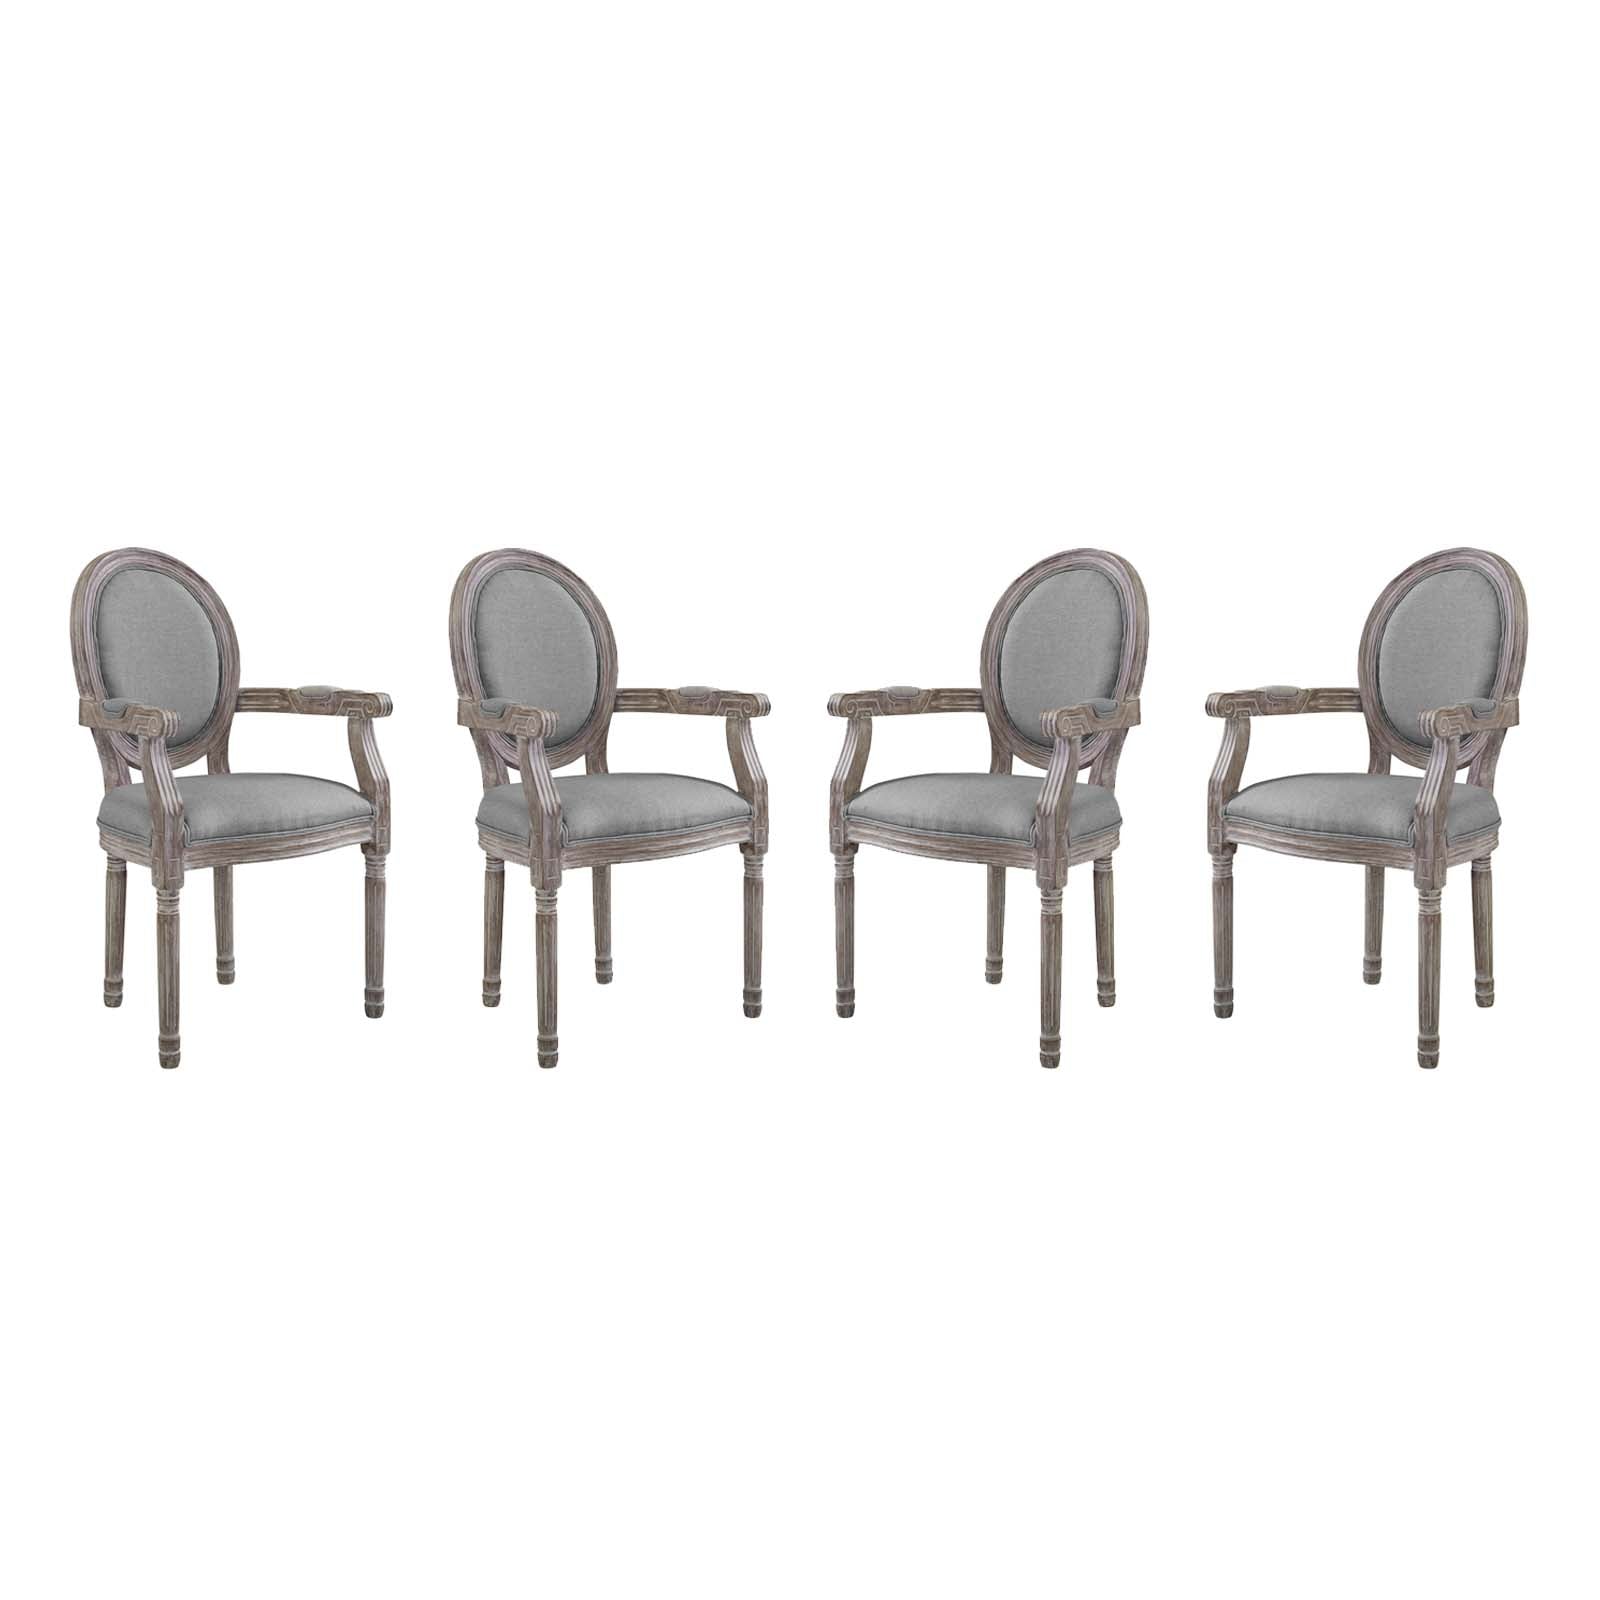 Emanate Dining Armchair Upholstered Fabric Set of 4 - East Shore Modern Home Furnishings